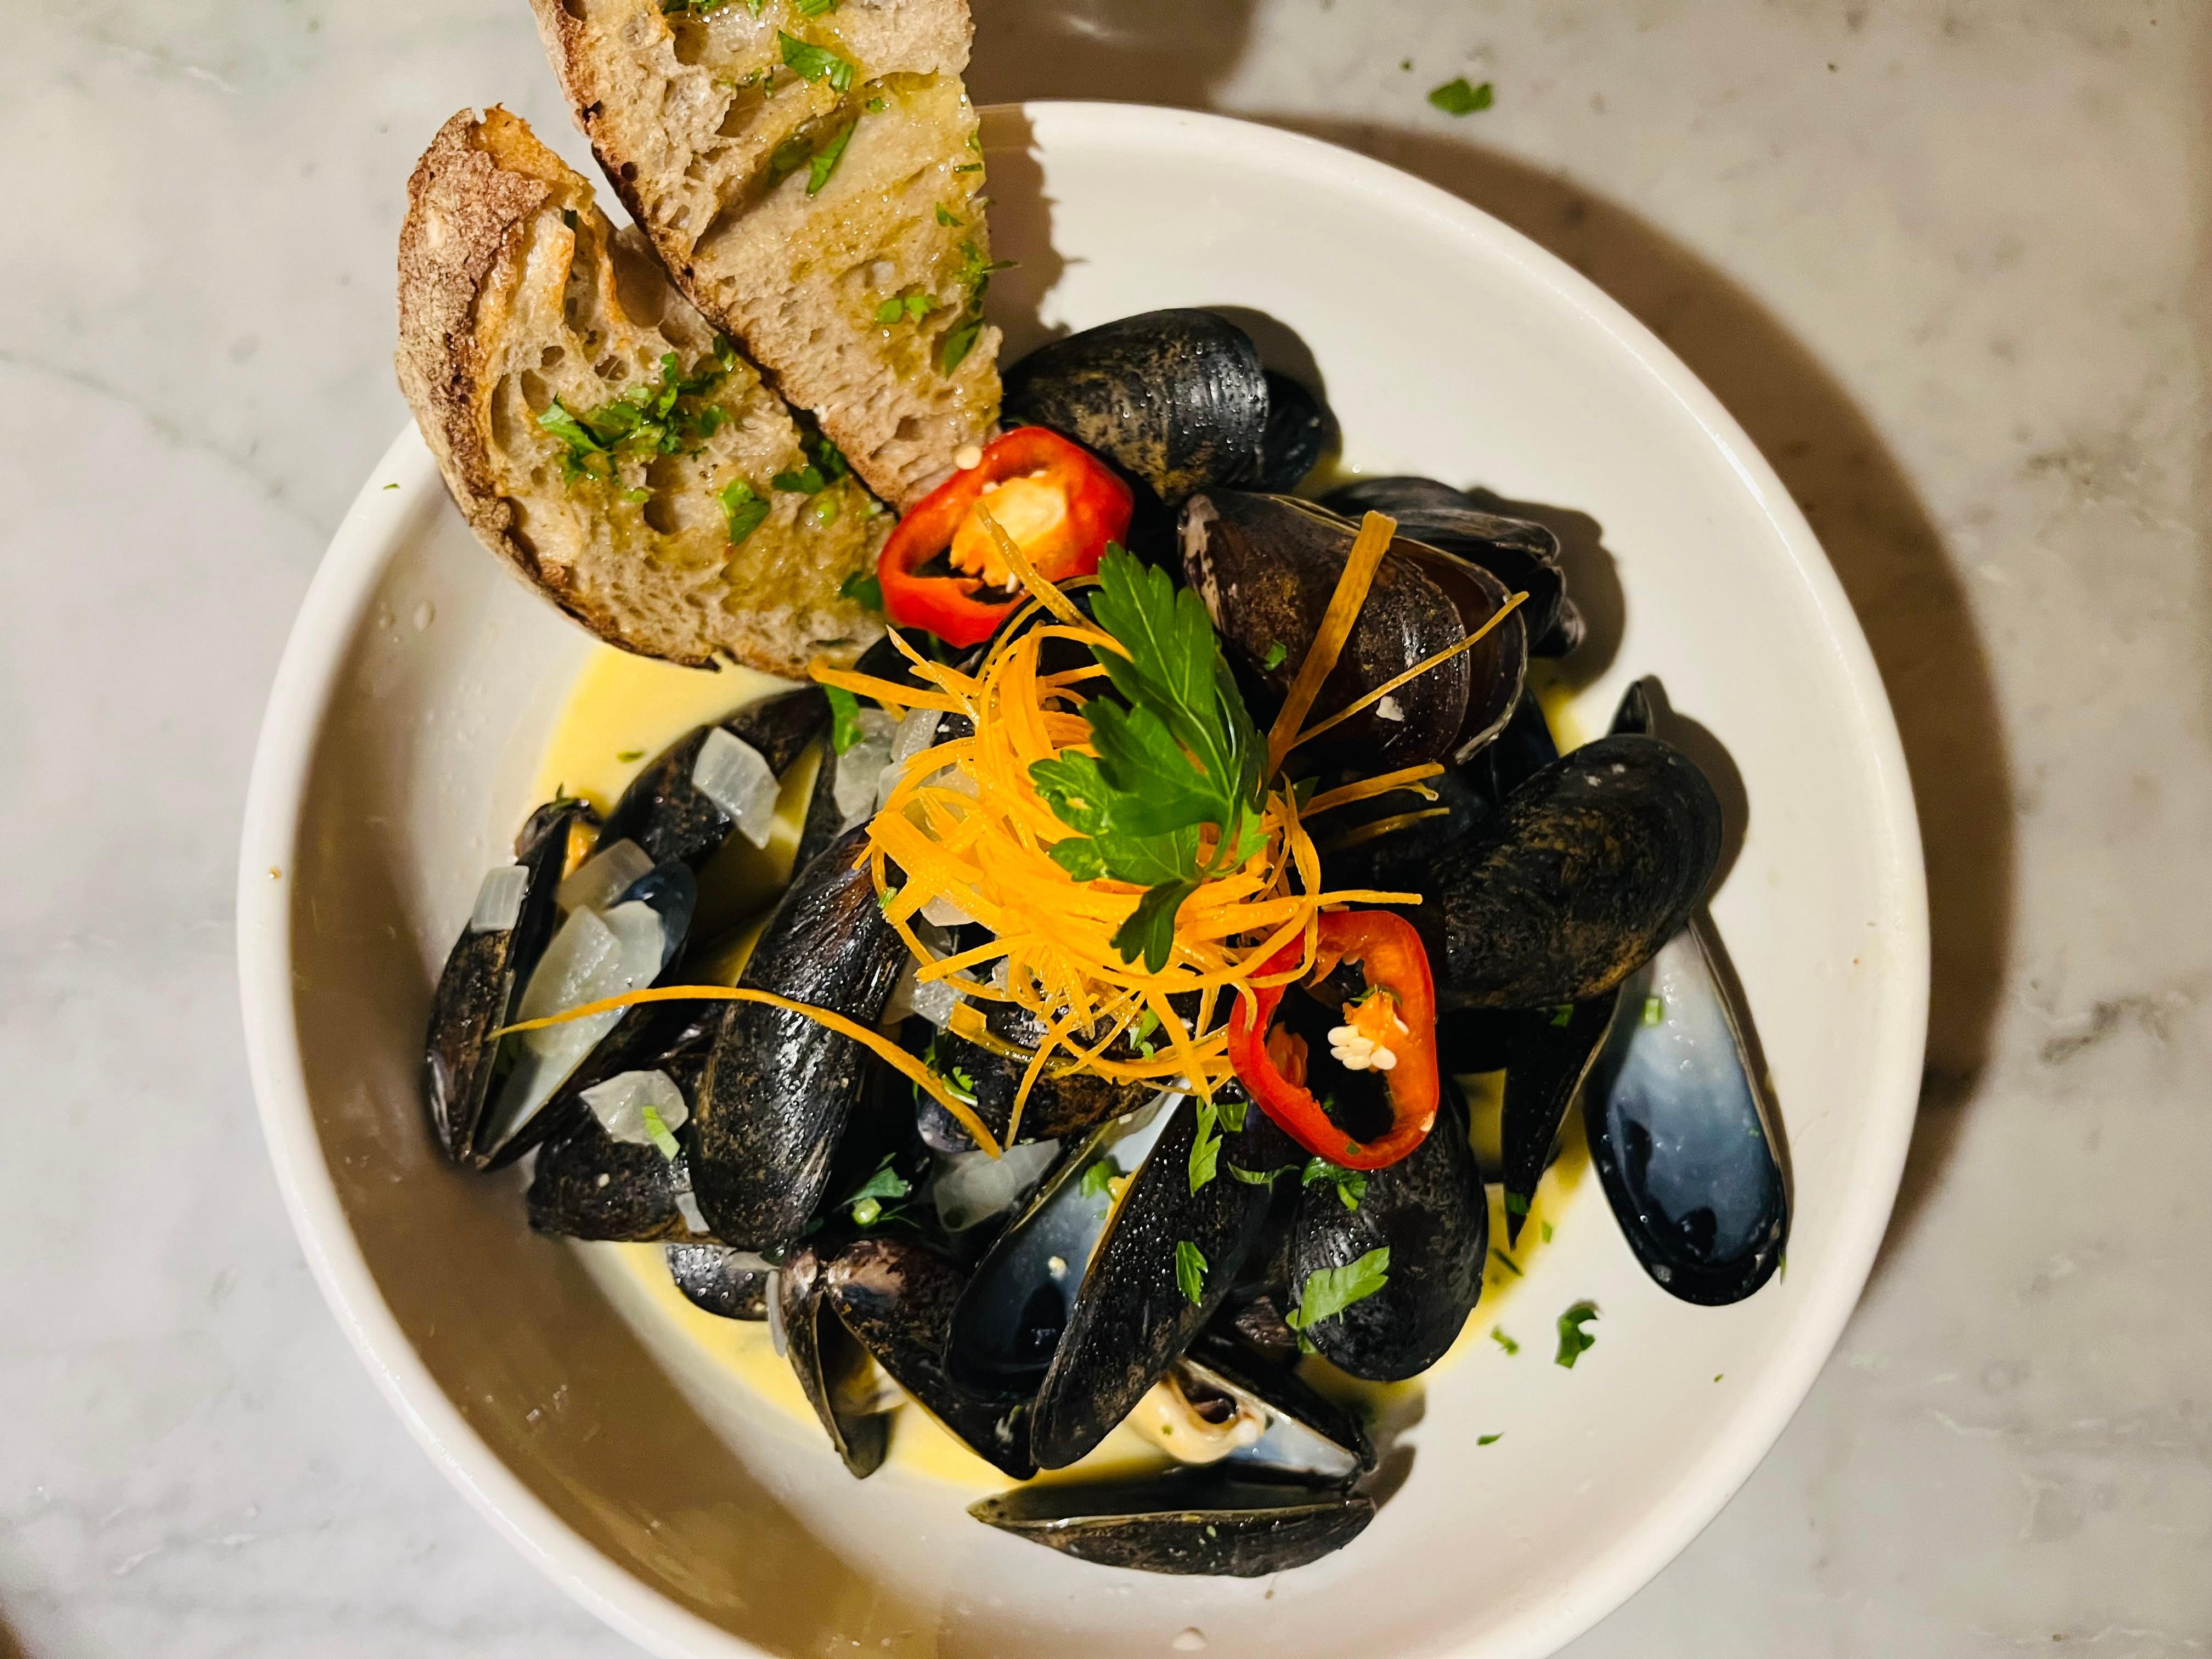 Moules Frites (Maine Mussels and Fries)